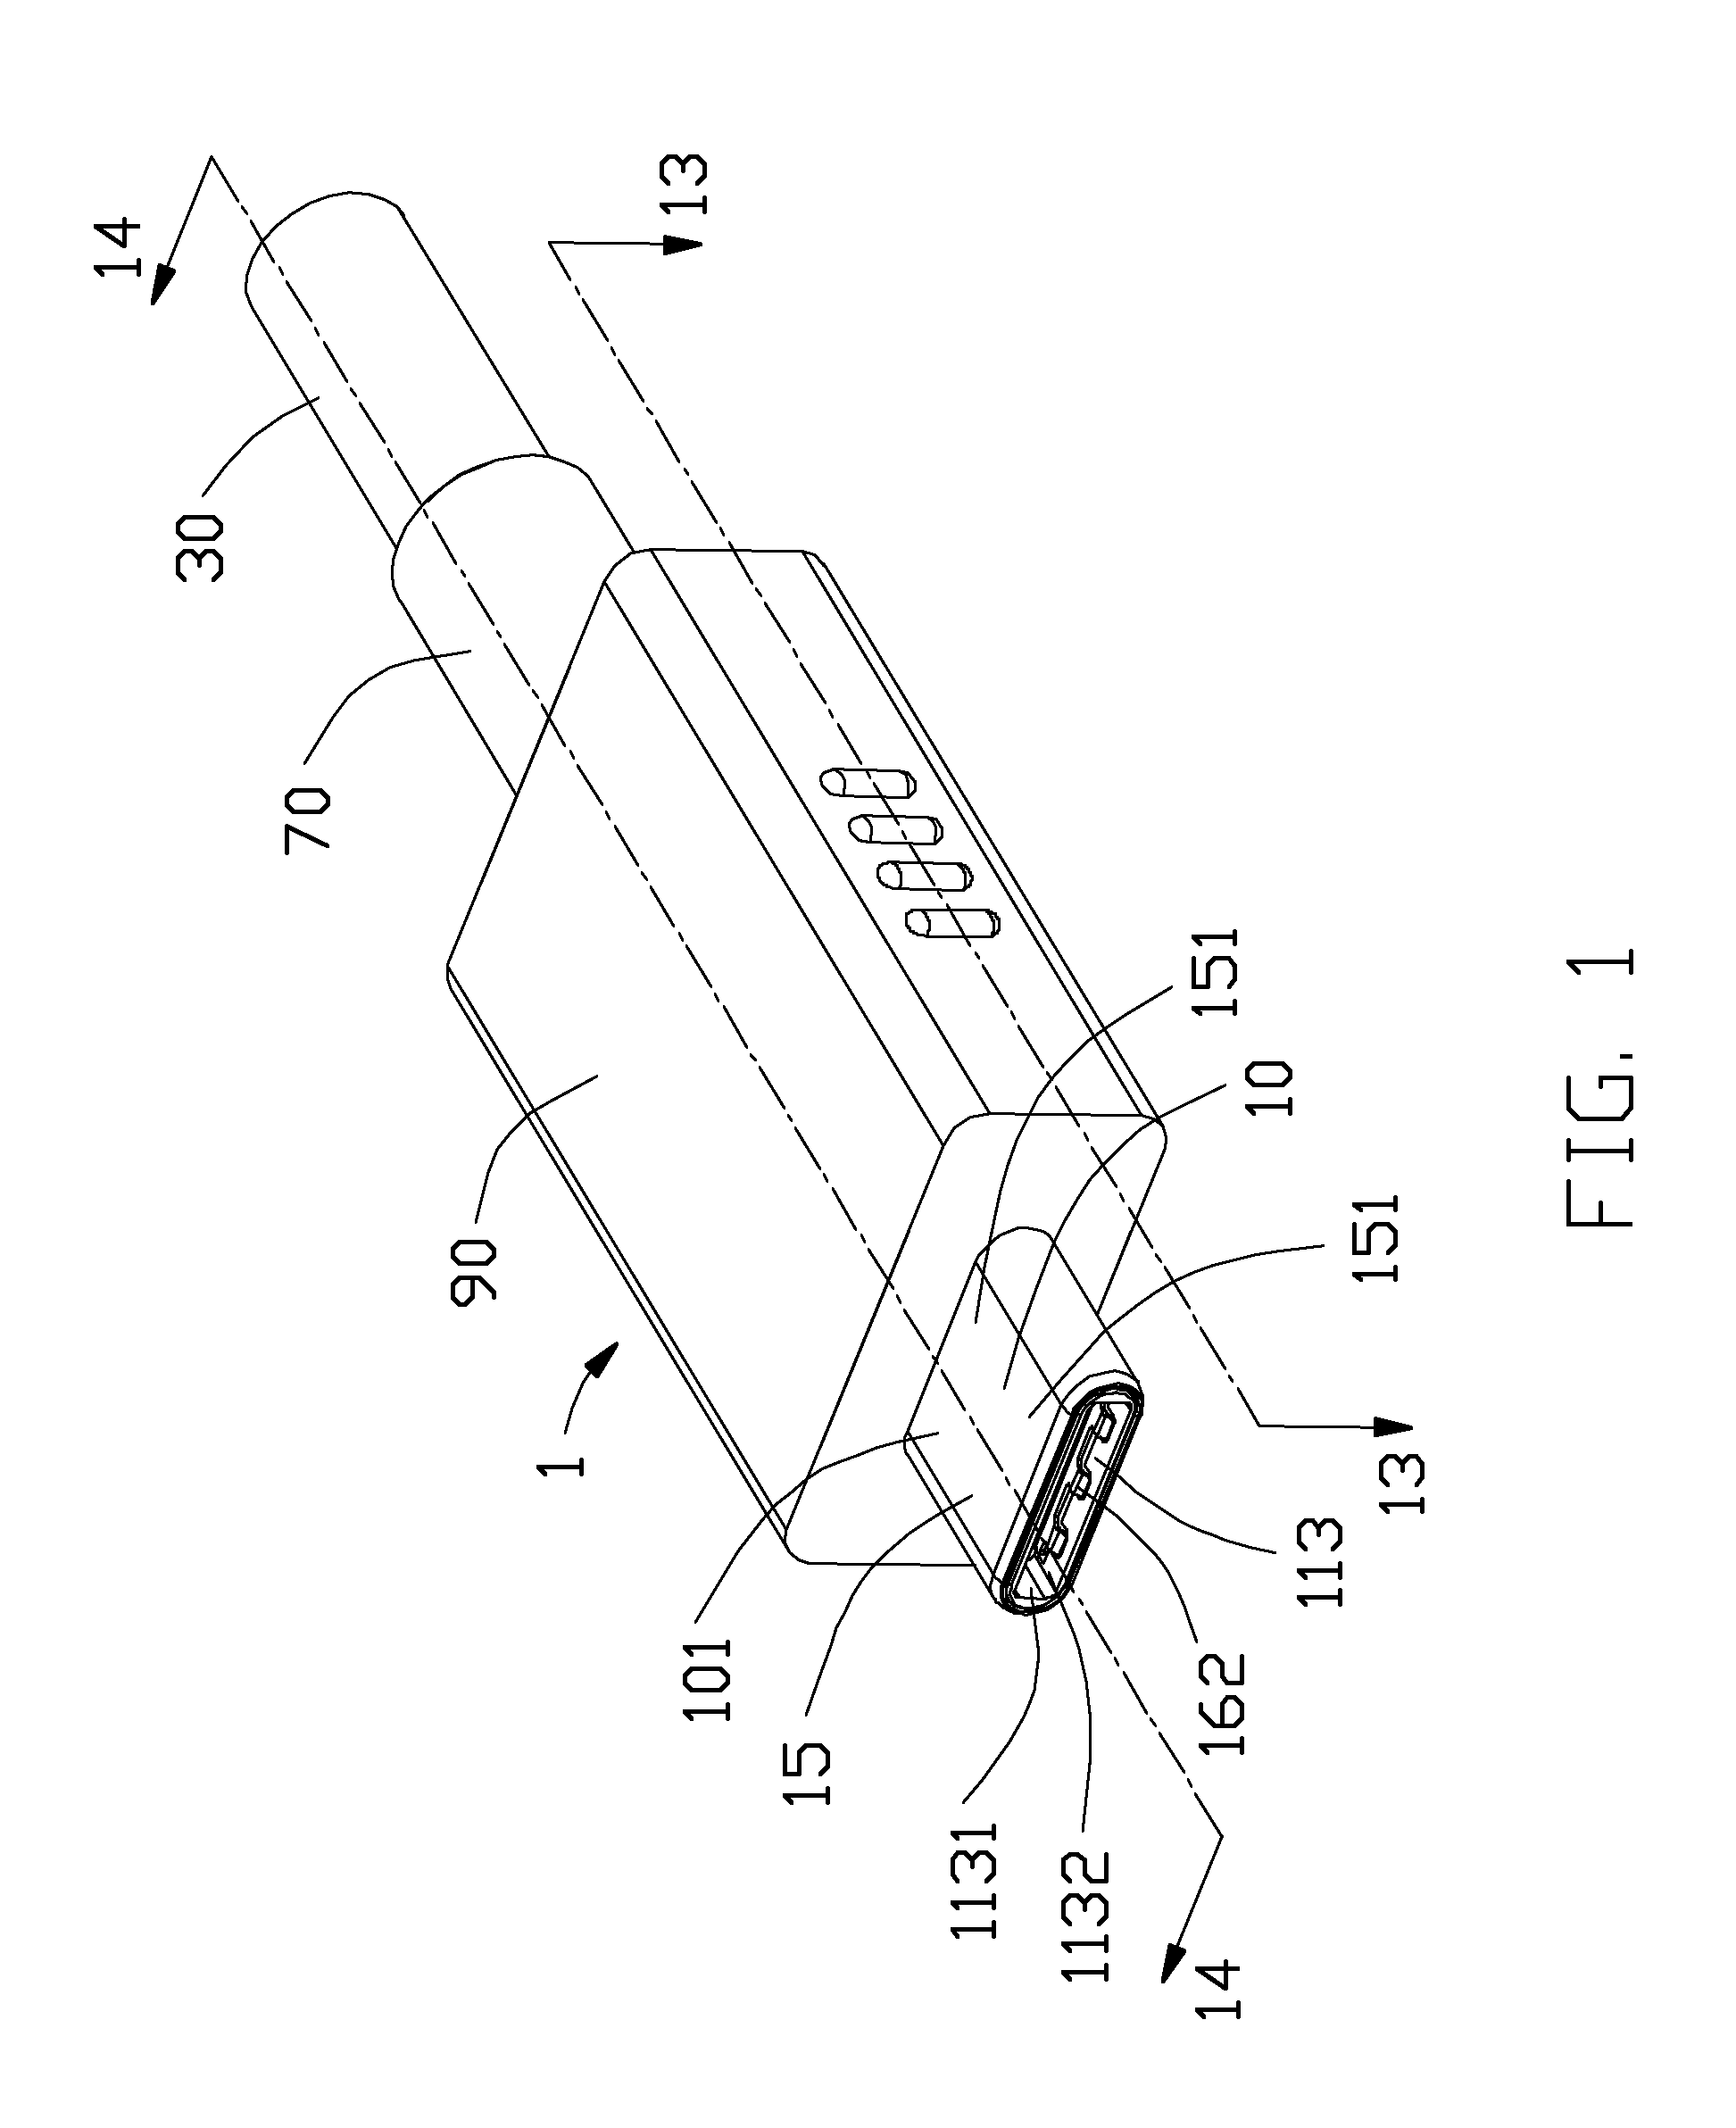 Plug connector assembly having improved anti-EMI performance